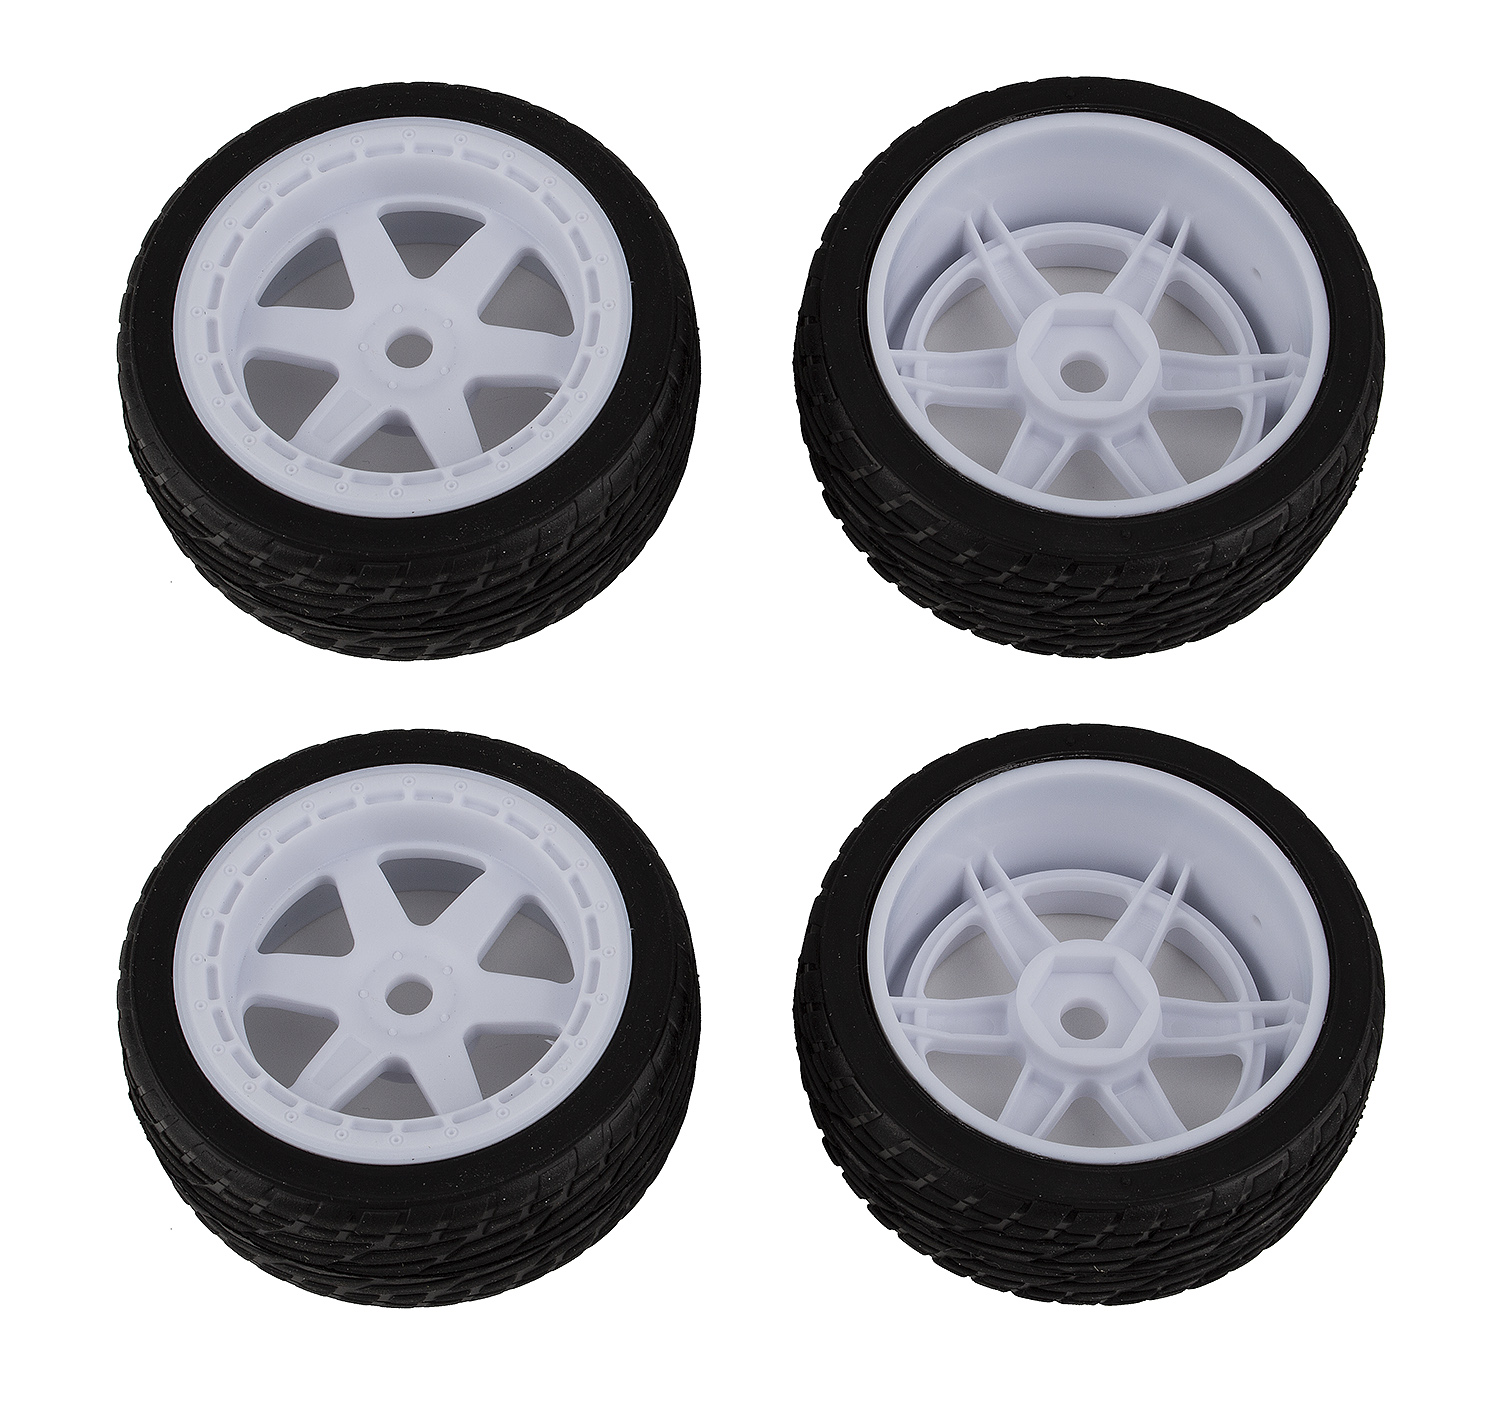 Hoonitruck Wheels and Tires, rubber